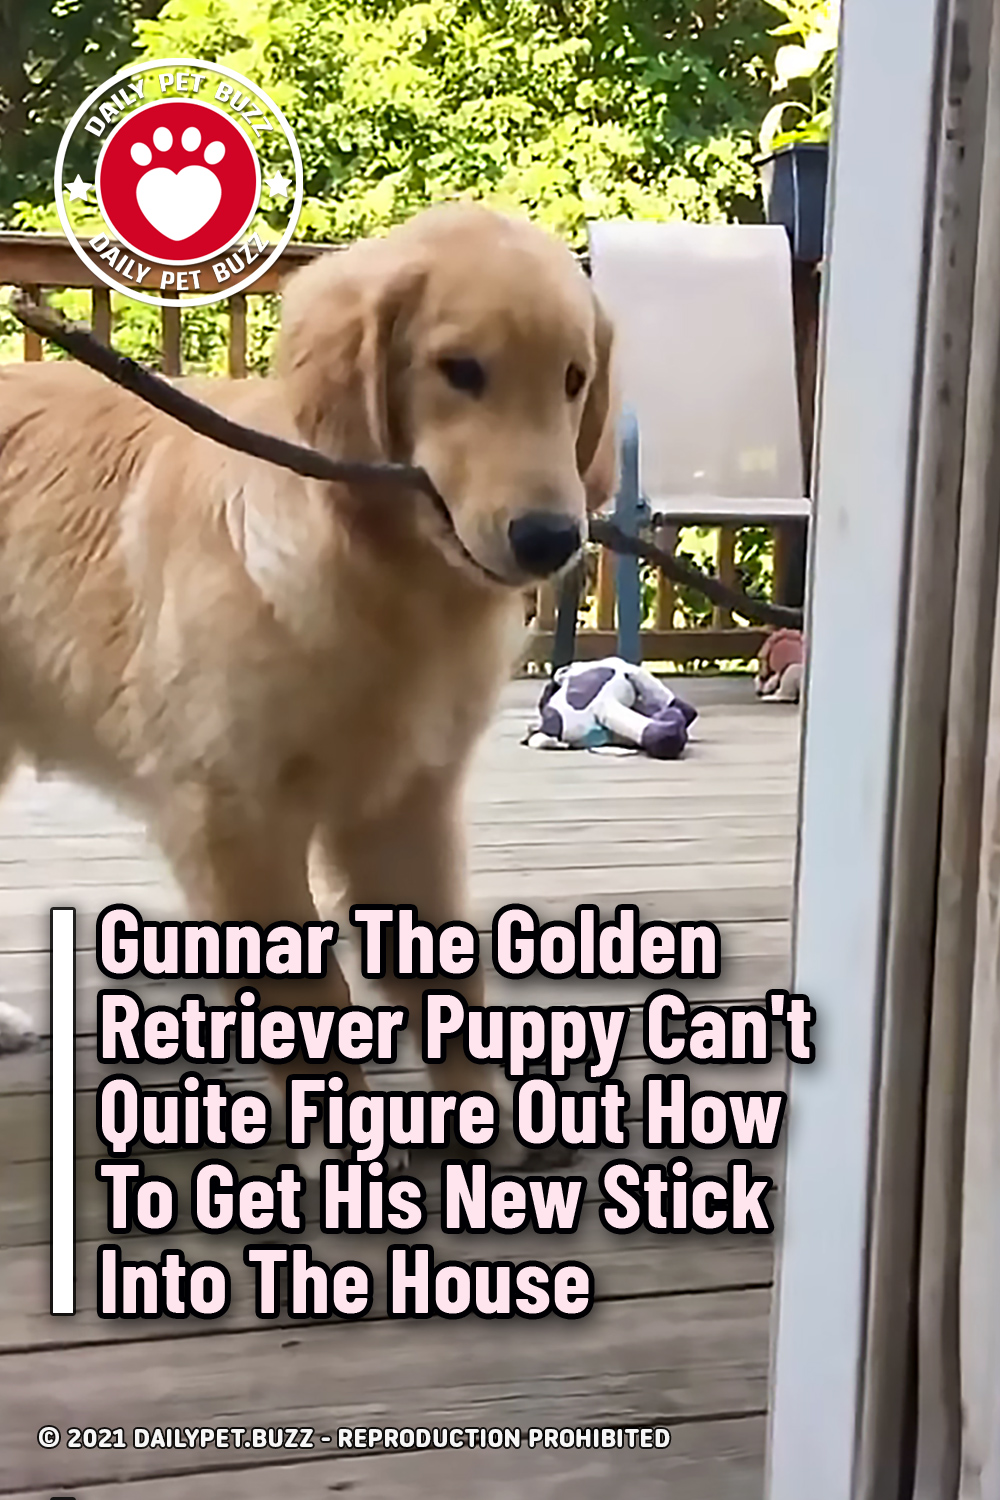 Gunnar The Golden Retriever Puppy Can\'t Quite Figure Out How To Get His New Stick Into The House